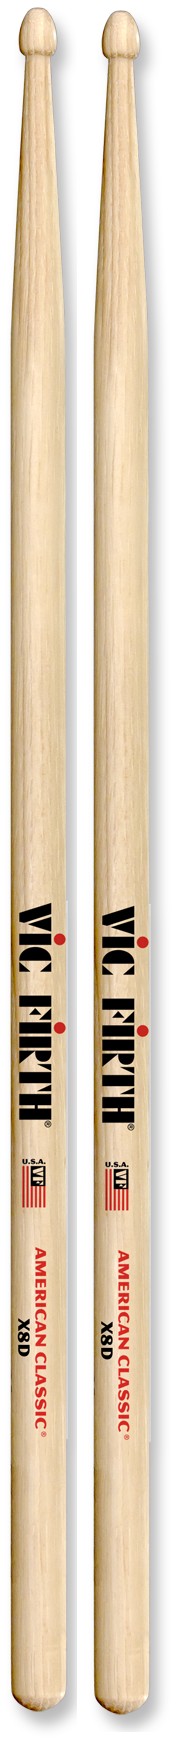 Vic Firth VFX8D Extreme 8D American Hickory Wood Tip